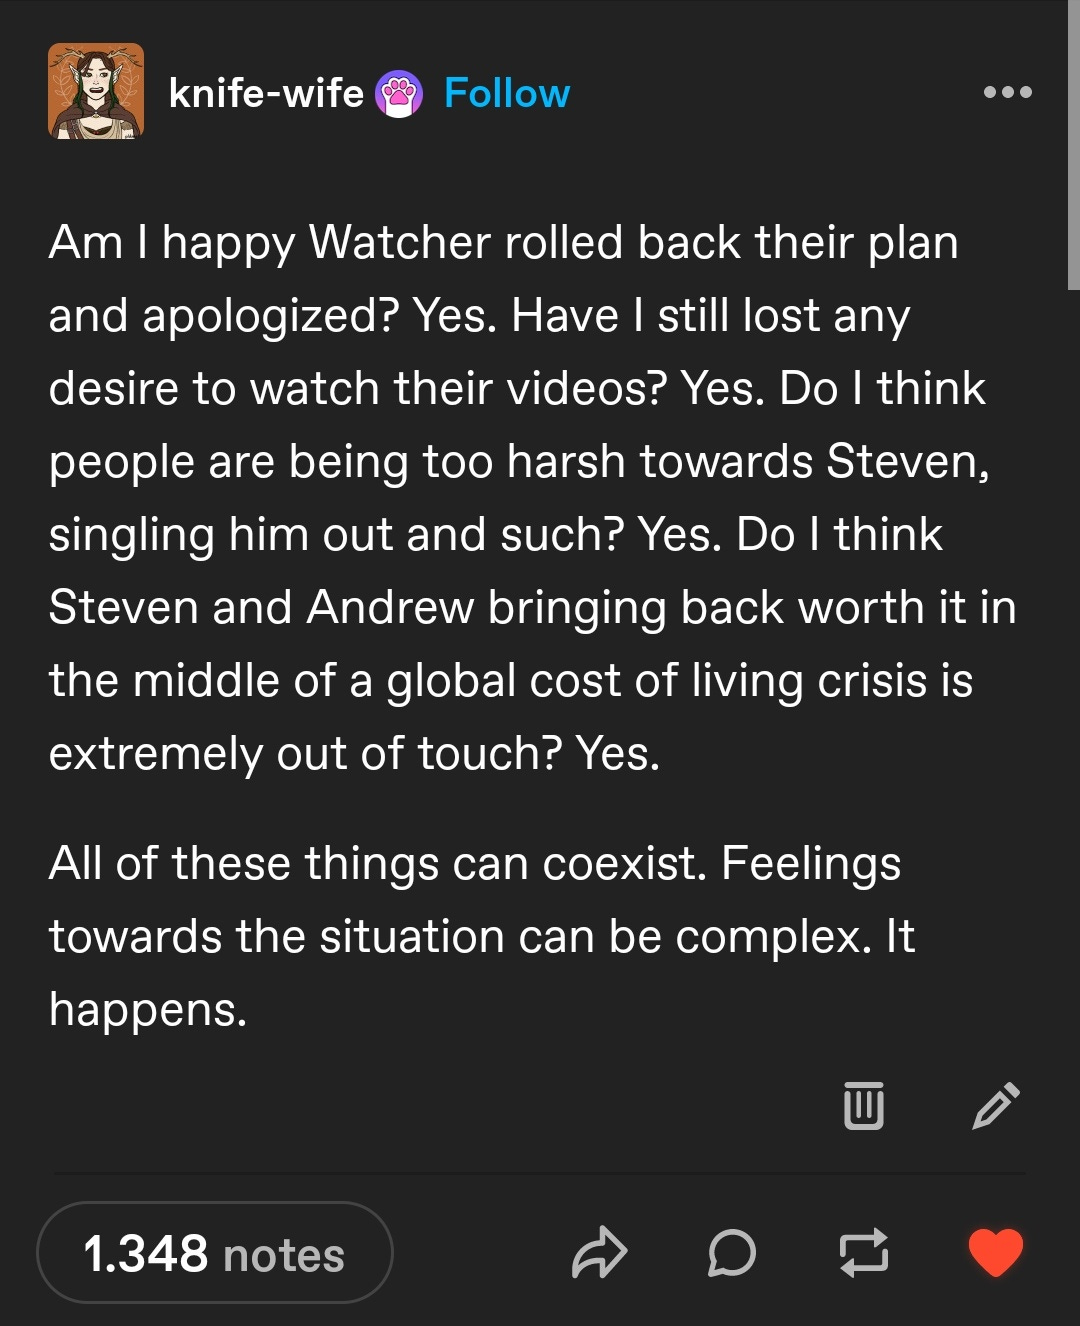 Tumblr post by user "knife-wife":

Am I happy Watcher rolled back their plan and apologized? Yes. Have I still lost any desire to watch their videos? Yes. Do I think people are being too harsh towards Steven, singling him out and such? Yes. Do I think Steven and Andrew bringing back worth it in the middle of a global cost of living crisis is extremely out of touch? Yes.

All of these things can coexist. Feelings towards the situation can be complex. It happens. 